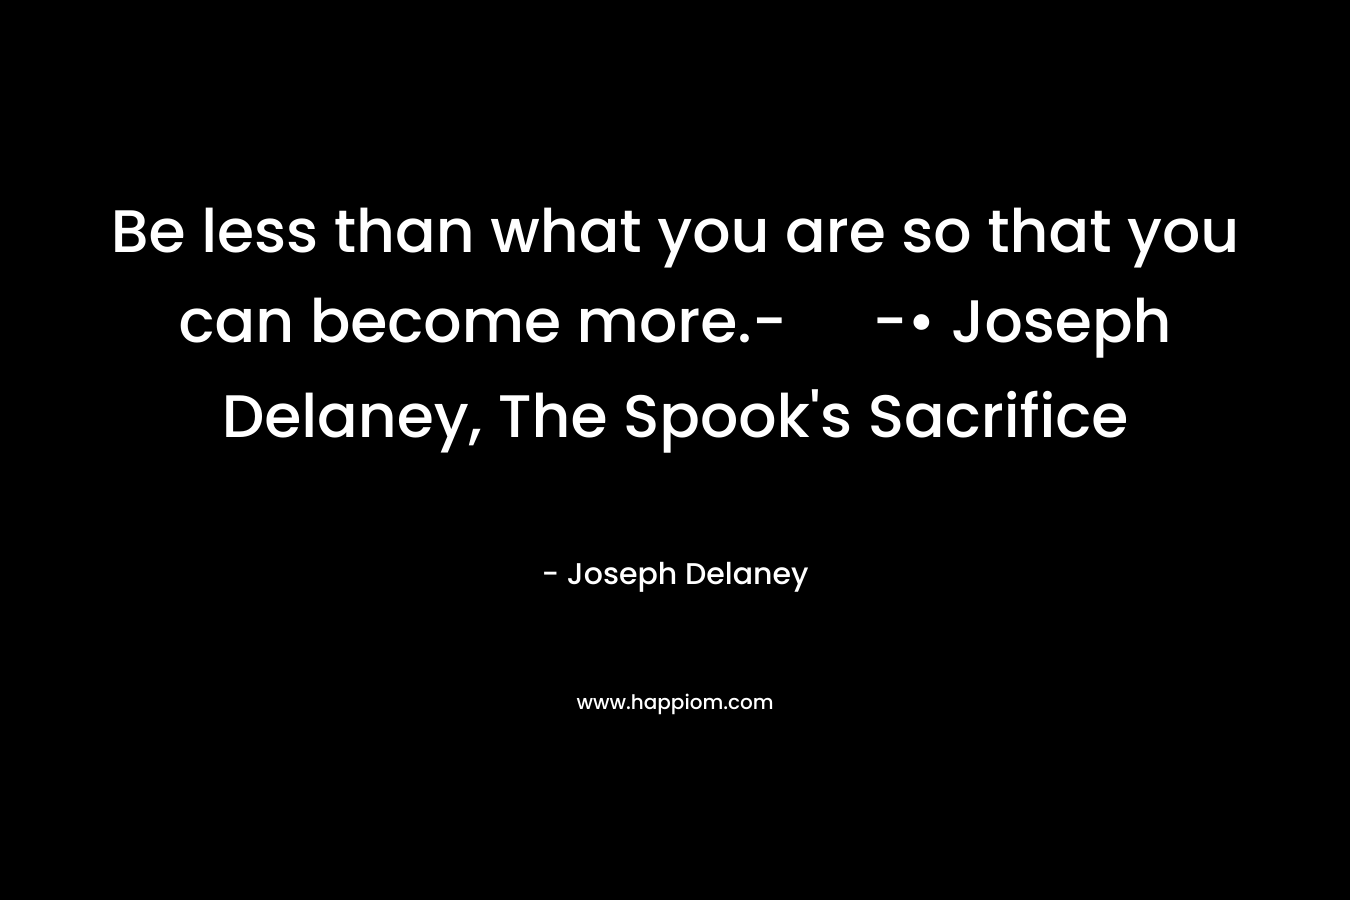 Be less than what you are so that you can become more.- -• Joseph Delaney, The Spook's Sacrifice